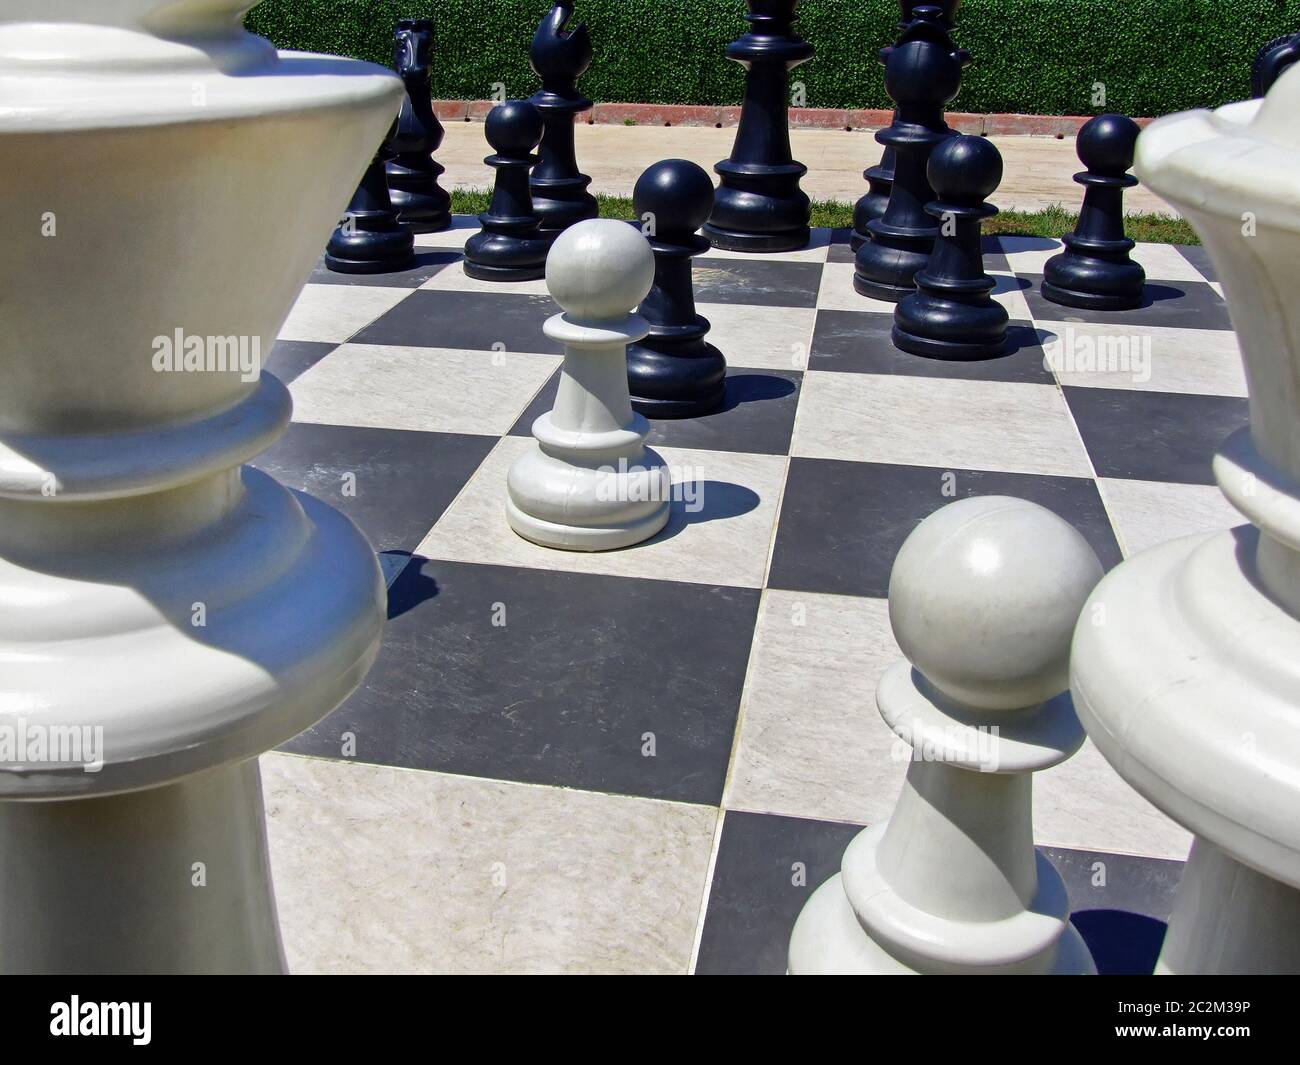 Giant chess board game set in the garden Stock Photo